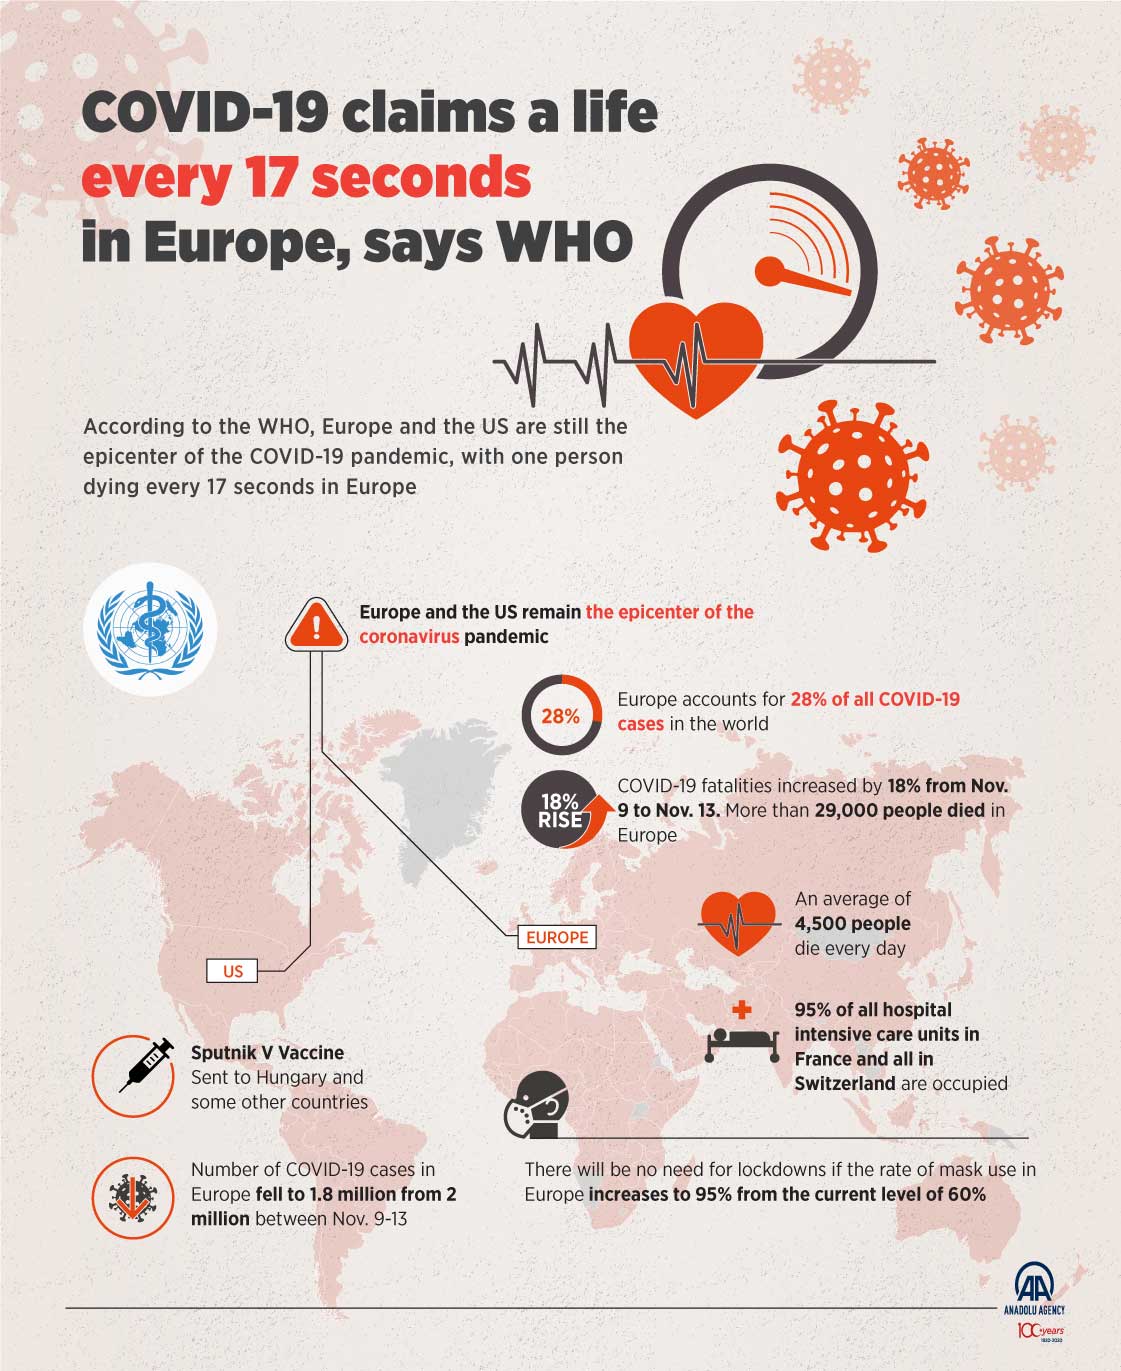 COVID-19 claims a life every 17 seconds in Europe, says WHO